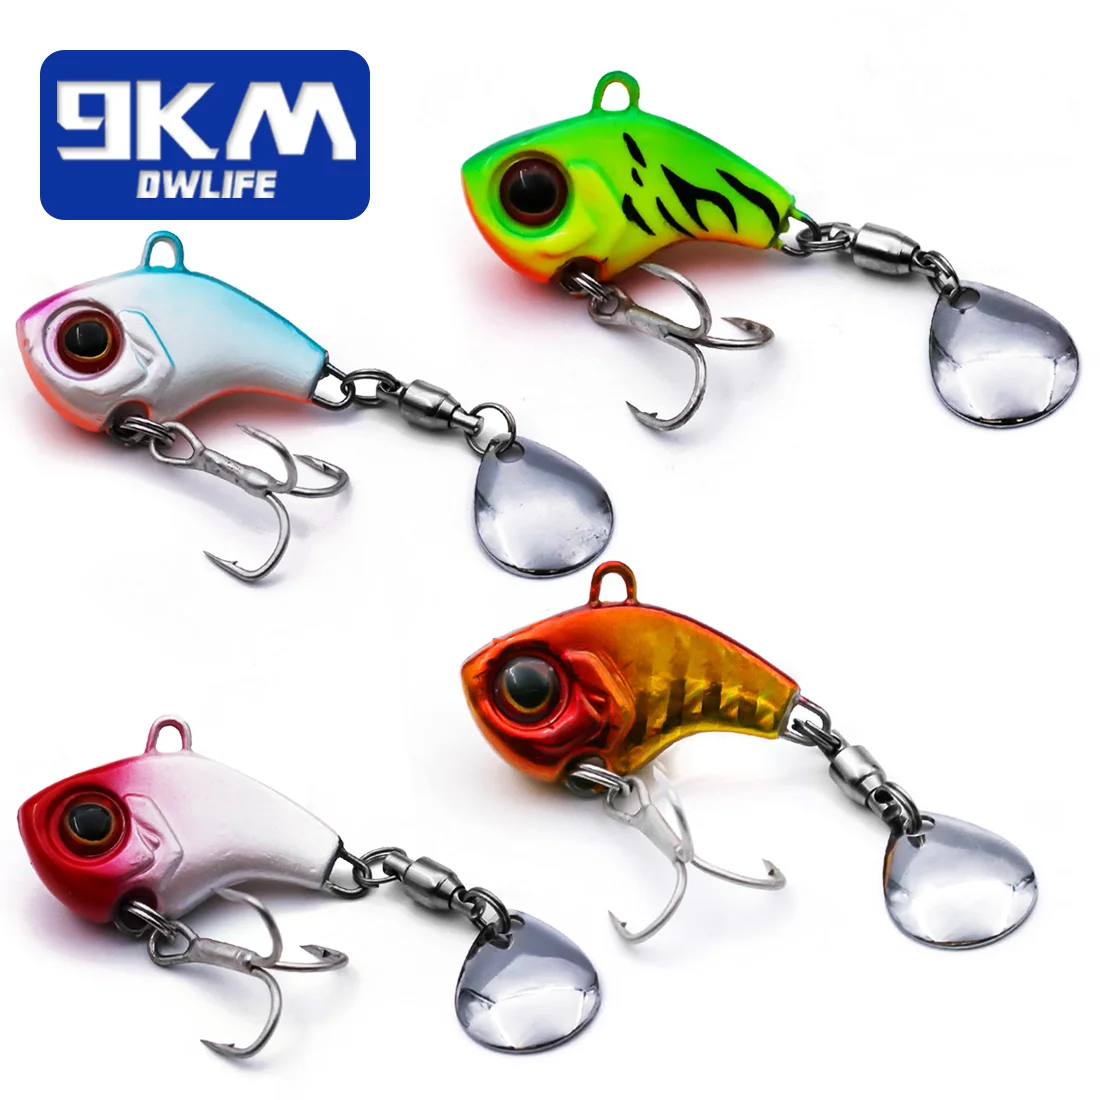 5PCS Blade Baits with Head Jig,5g Metal VIB Hard Blade Bait Fishing Spoon  Lures for Freshwater Saltwater Bass Walleyes Trout Crappie